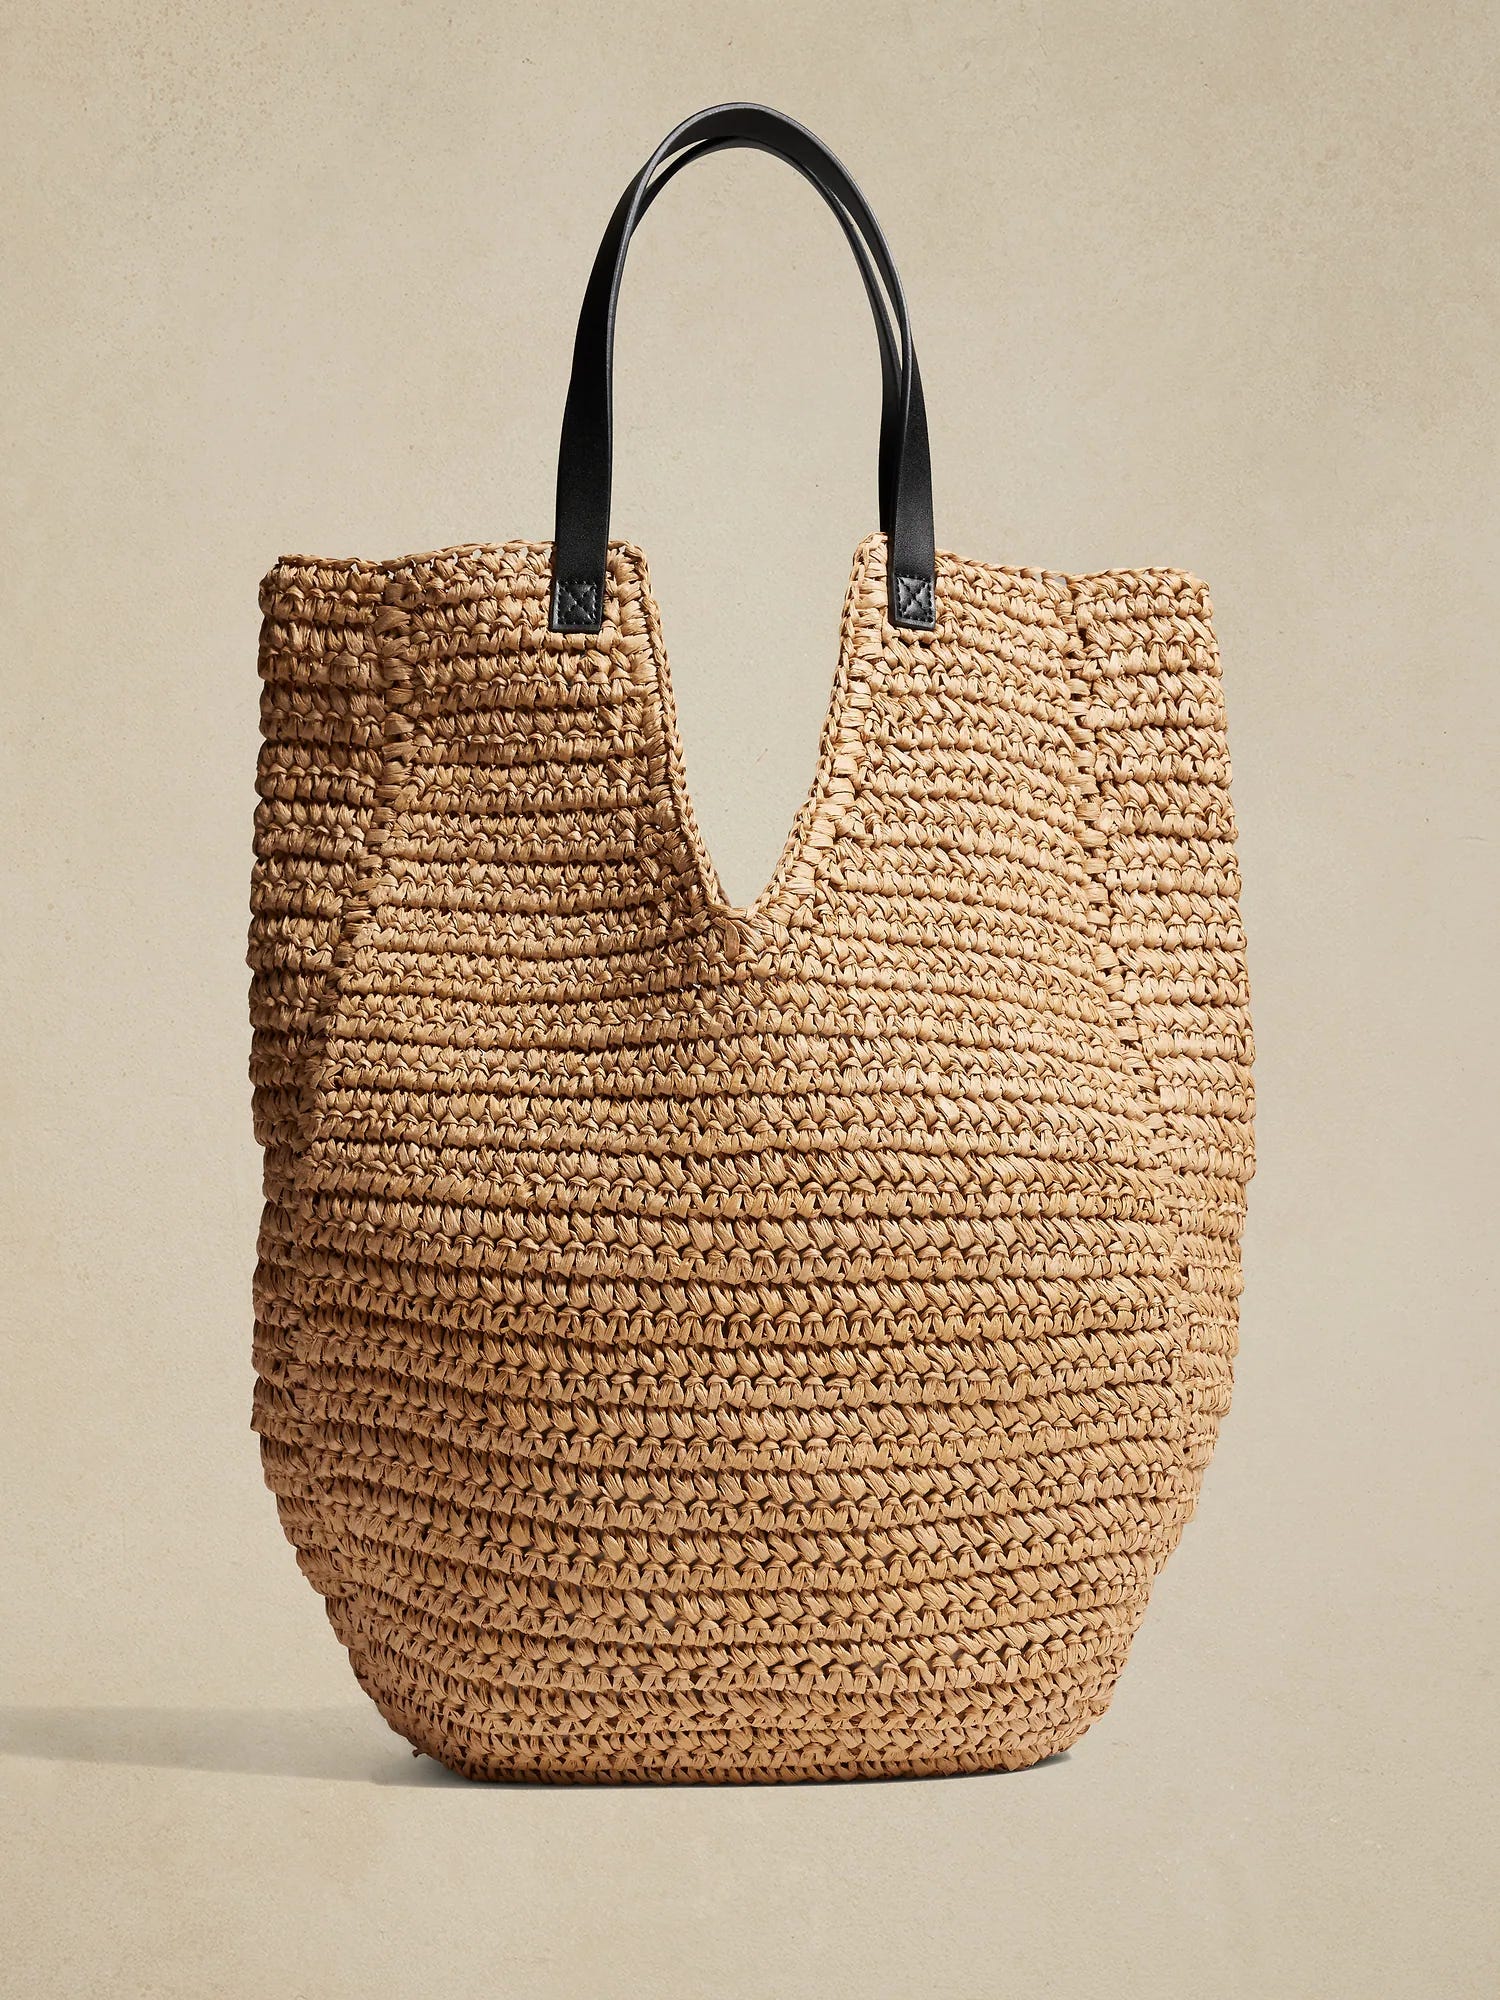 Straw Bags for Summer - The Small Things Blog